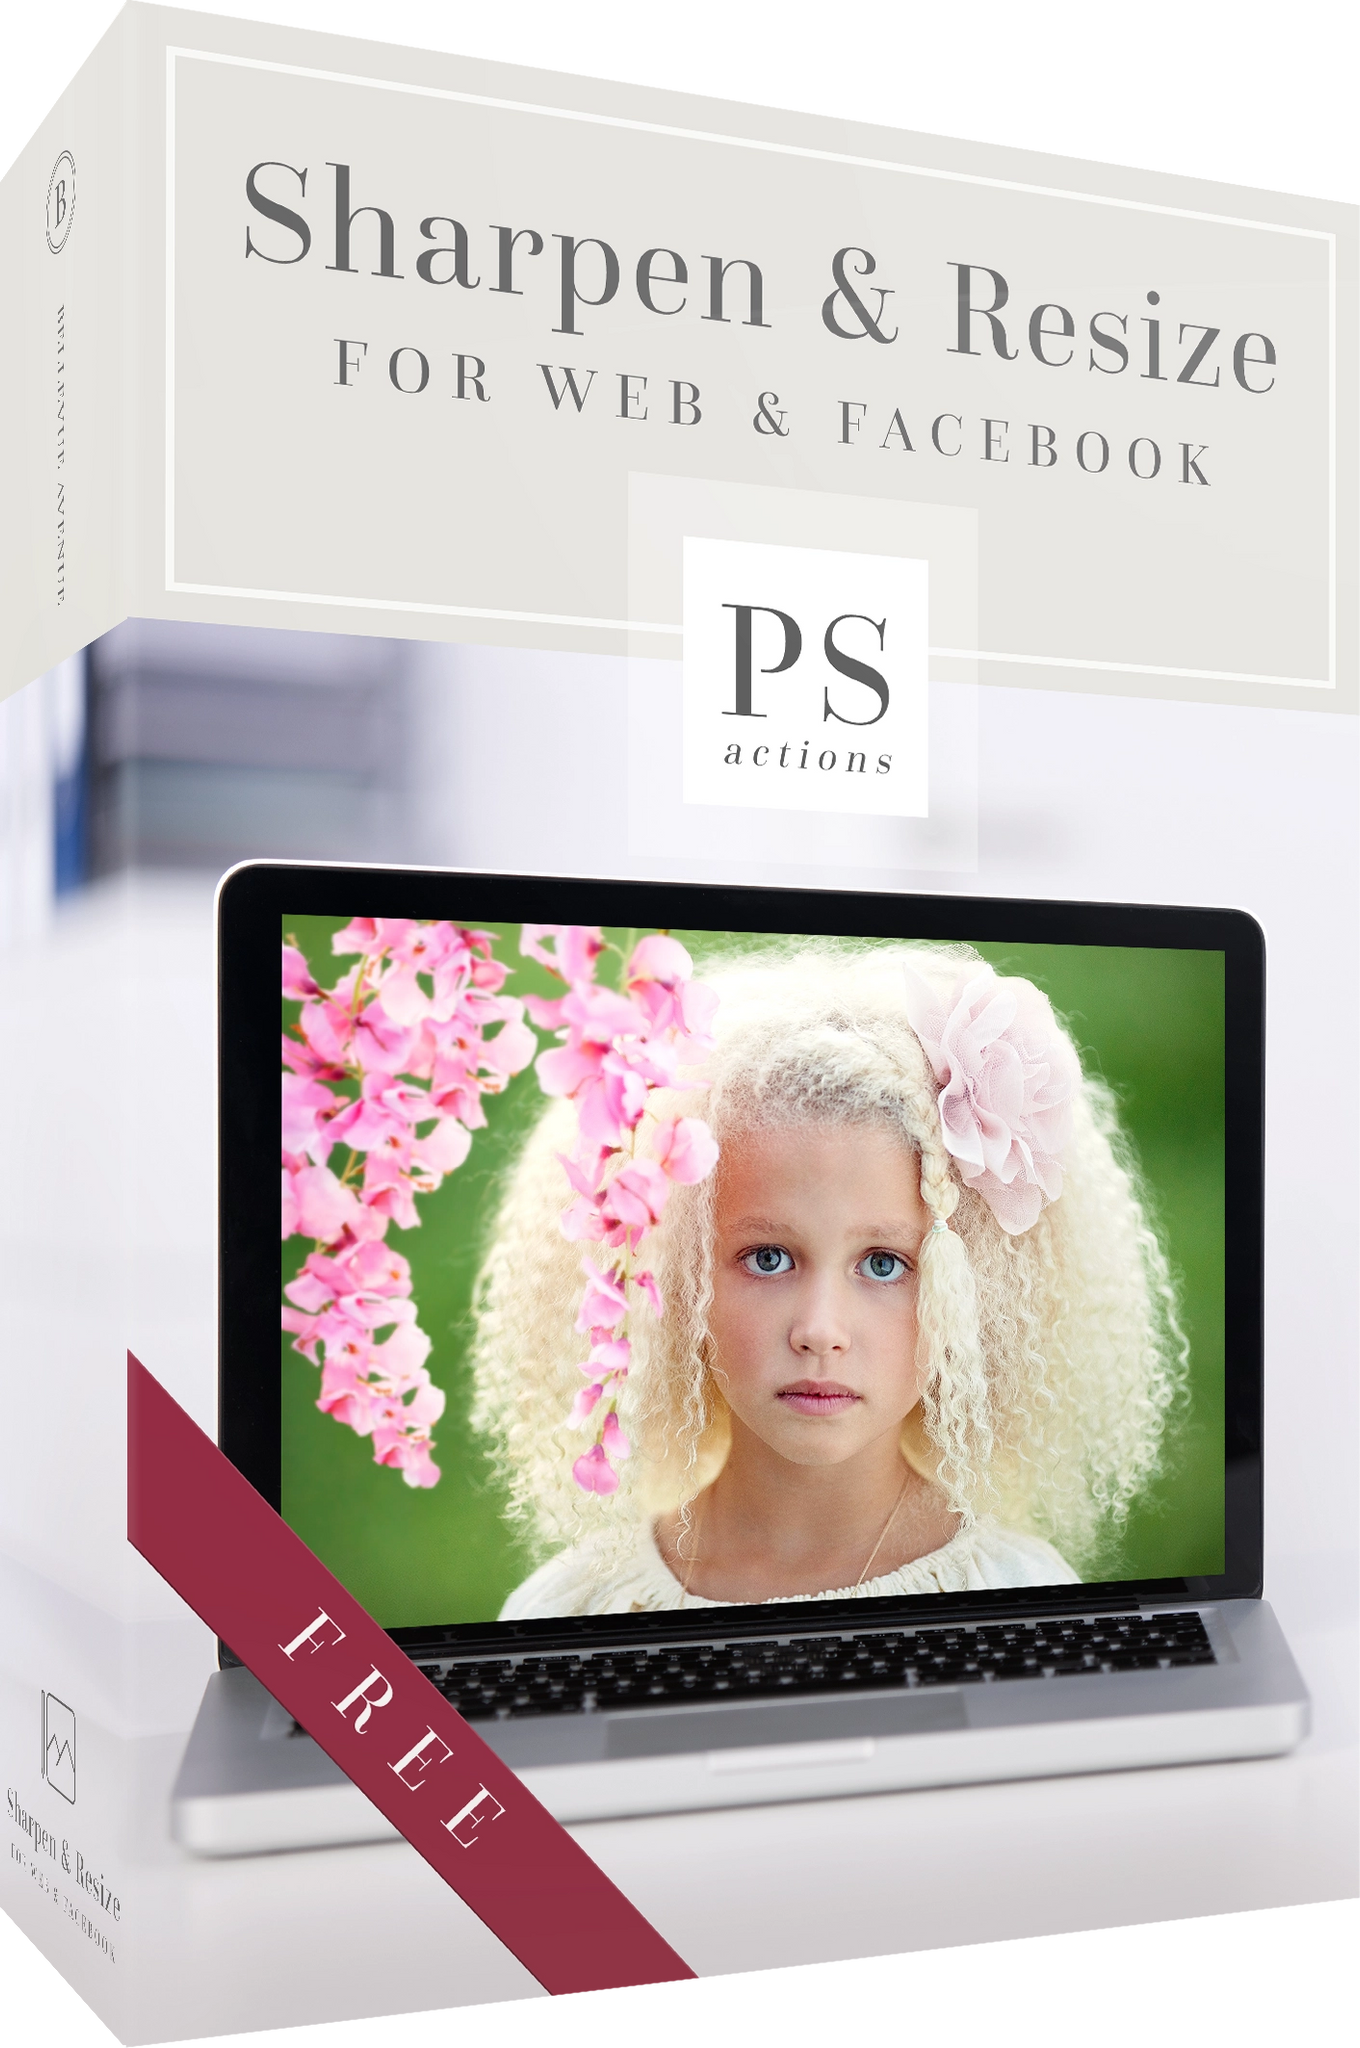 Free Sharpen Resize Photoshop Action for Web Facebook